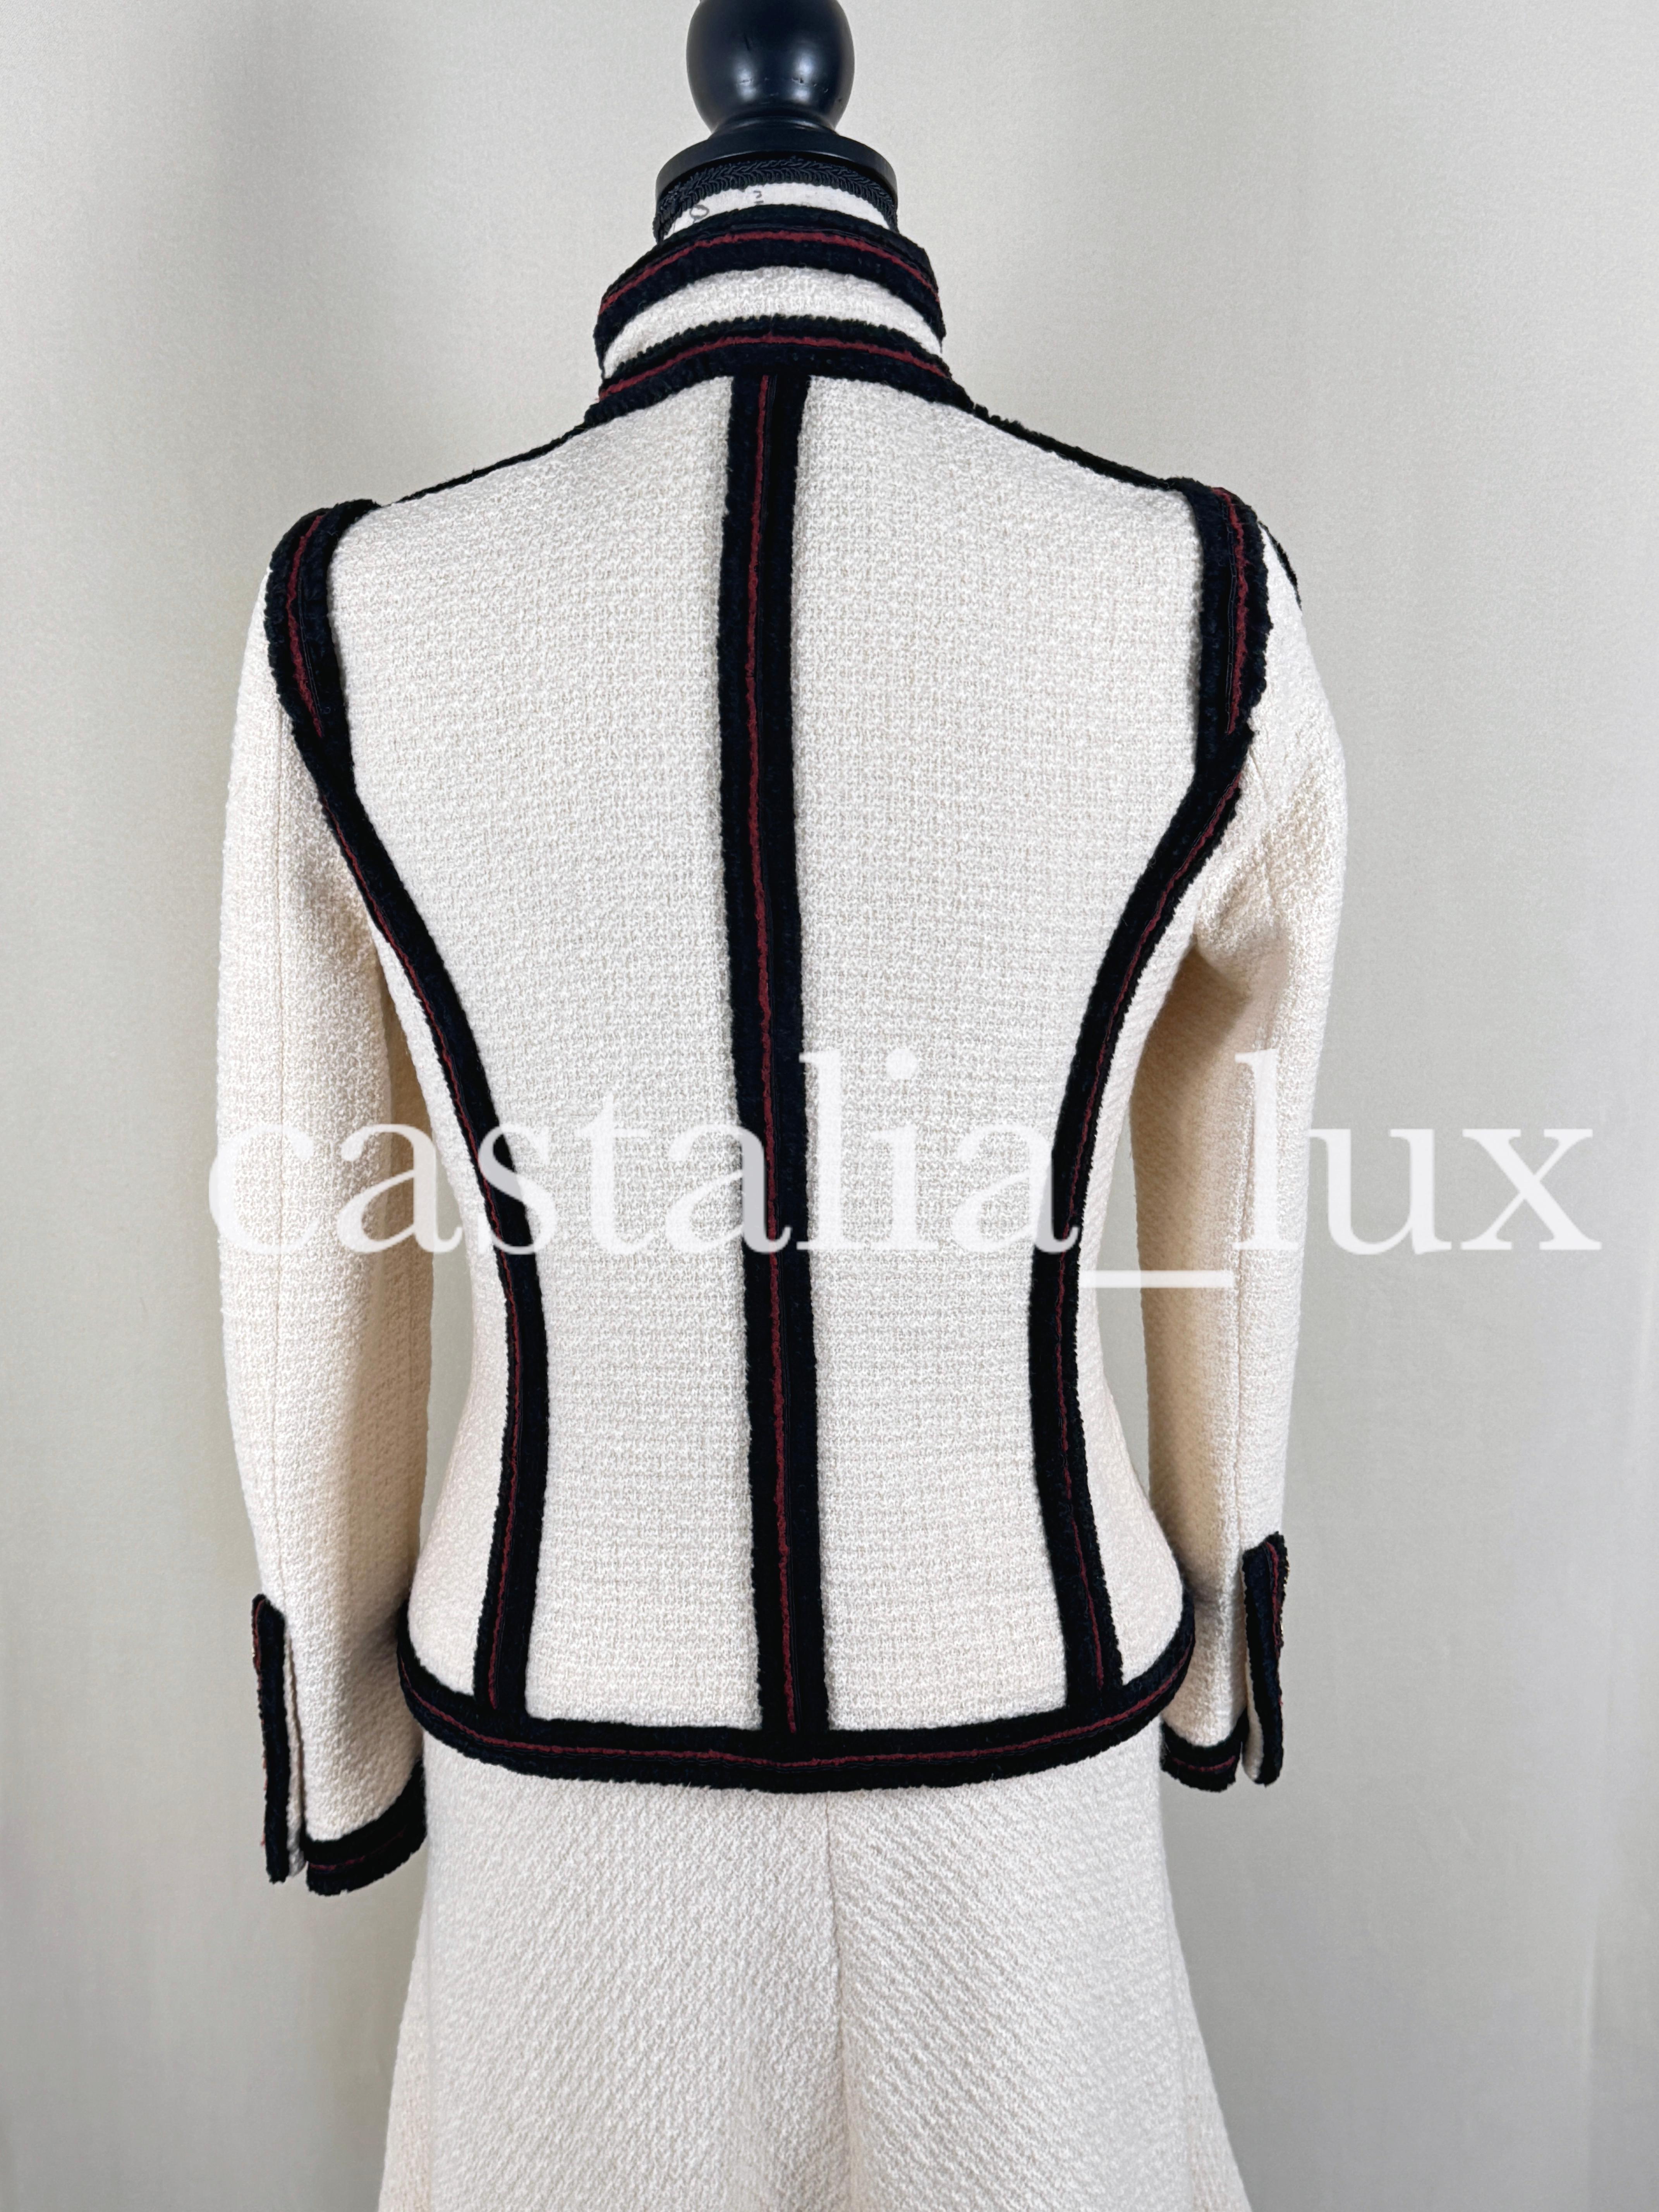 Chanel Kate Moss Style Collectors Tweed Jacket For Sale 11